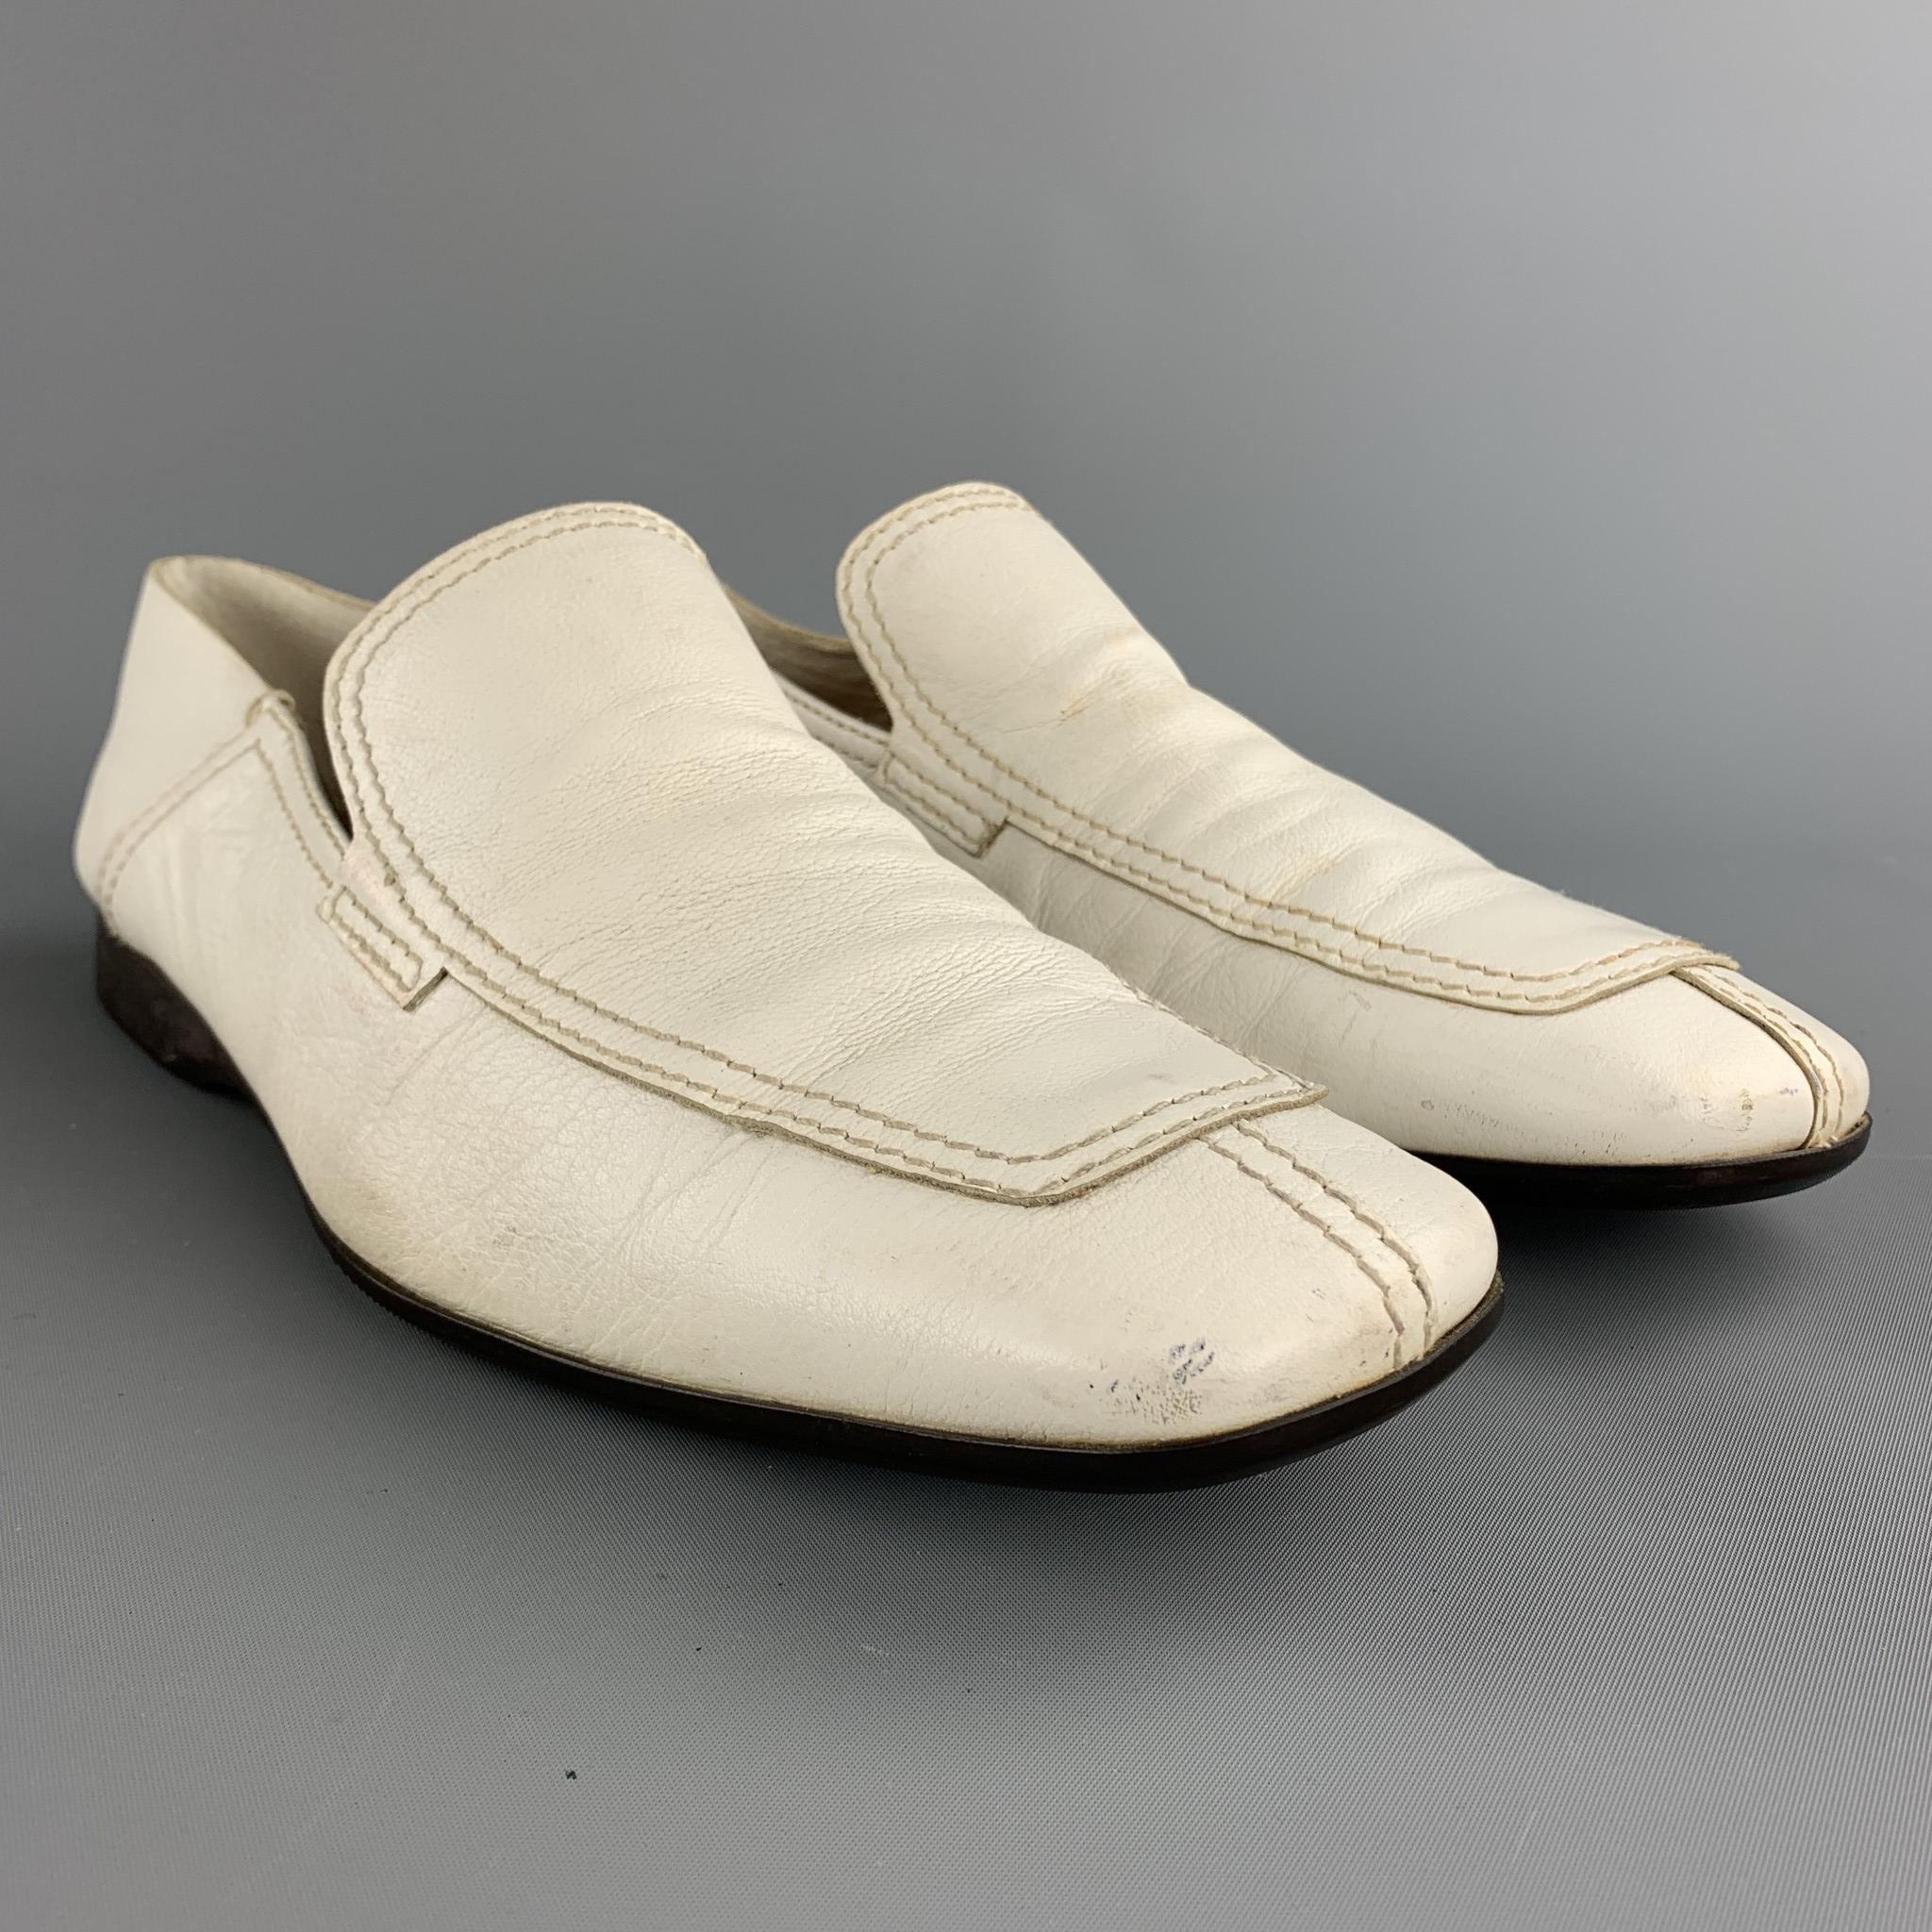 PRADA loafers comes in a white leather featuring a split toe style and a rubber sole. As-Is. Made in Italy.

Fair Pre-Owned Condition.
Marked: 9.5

Outsole:

12 in. x 3.75 in. 